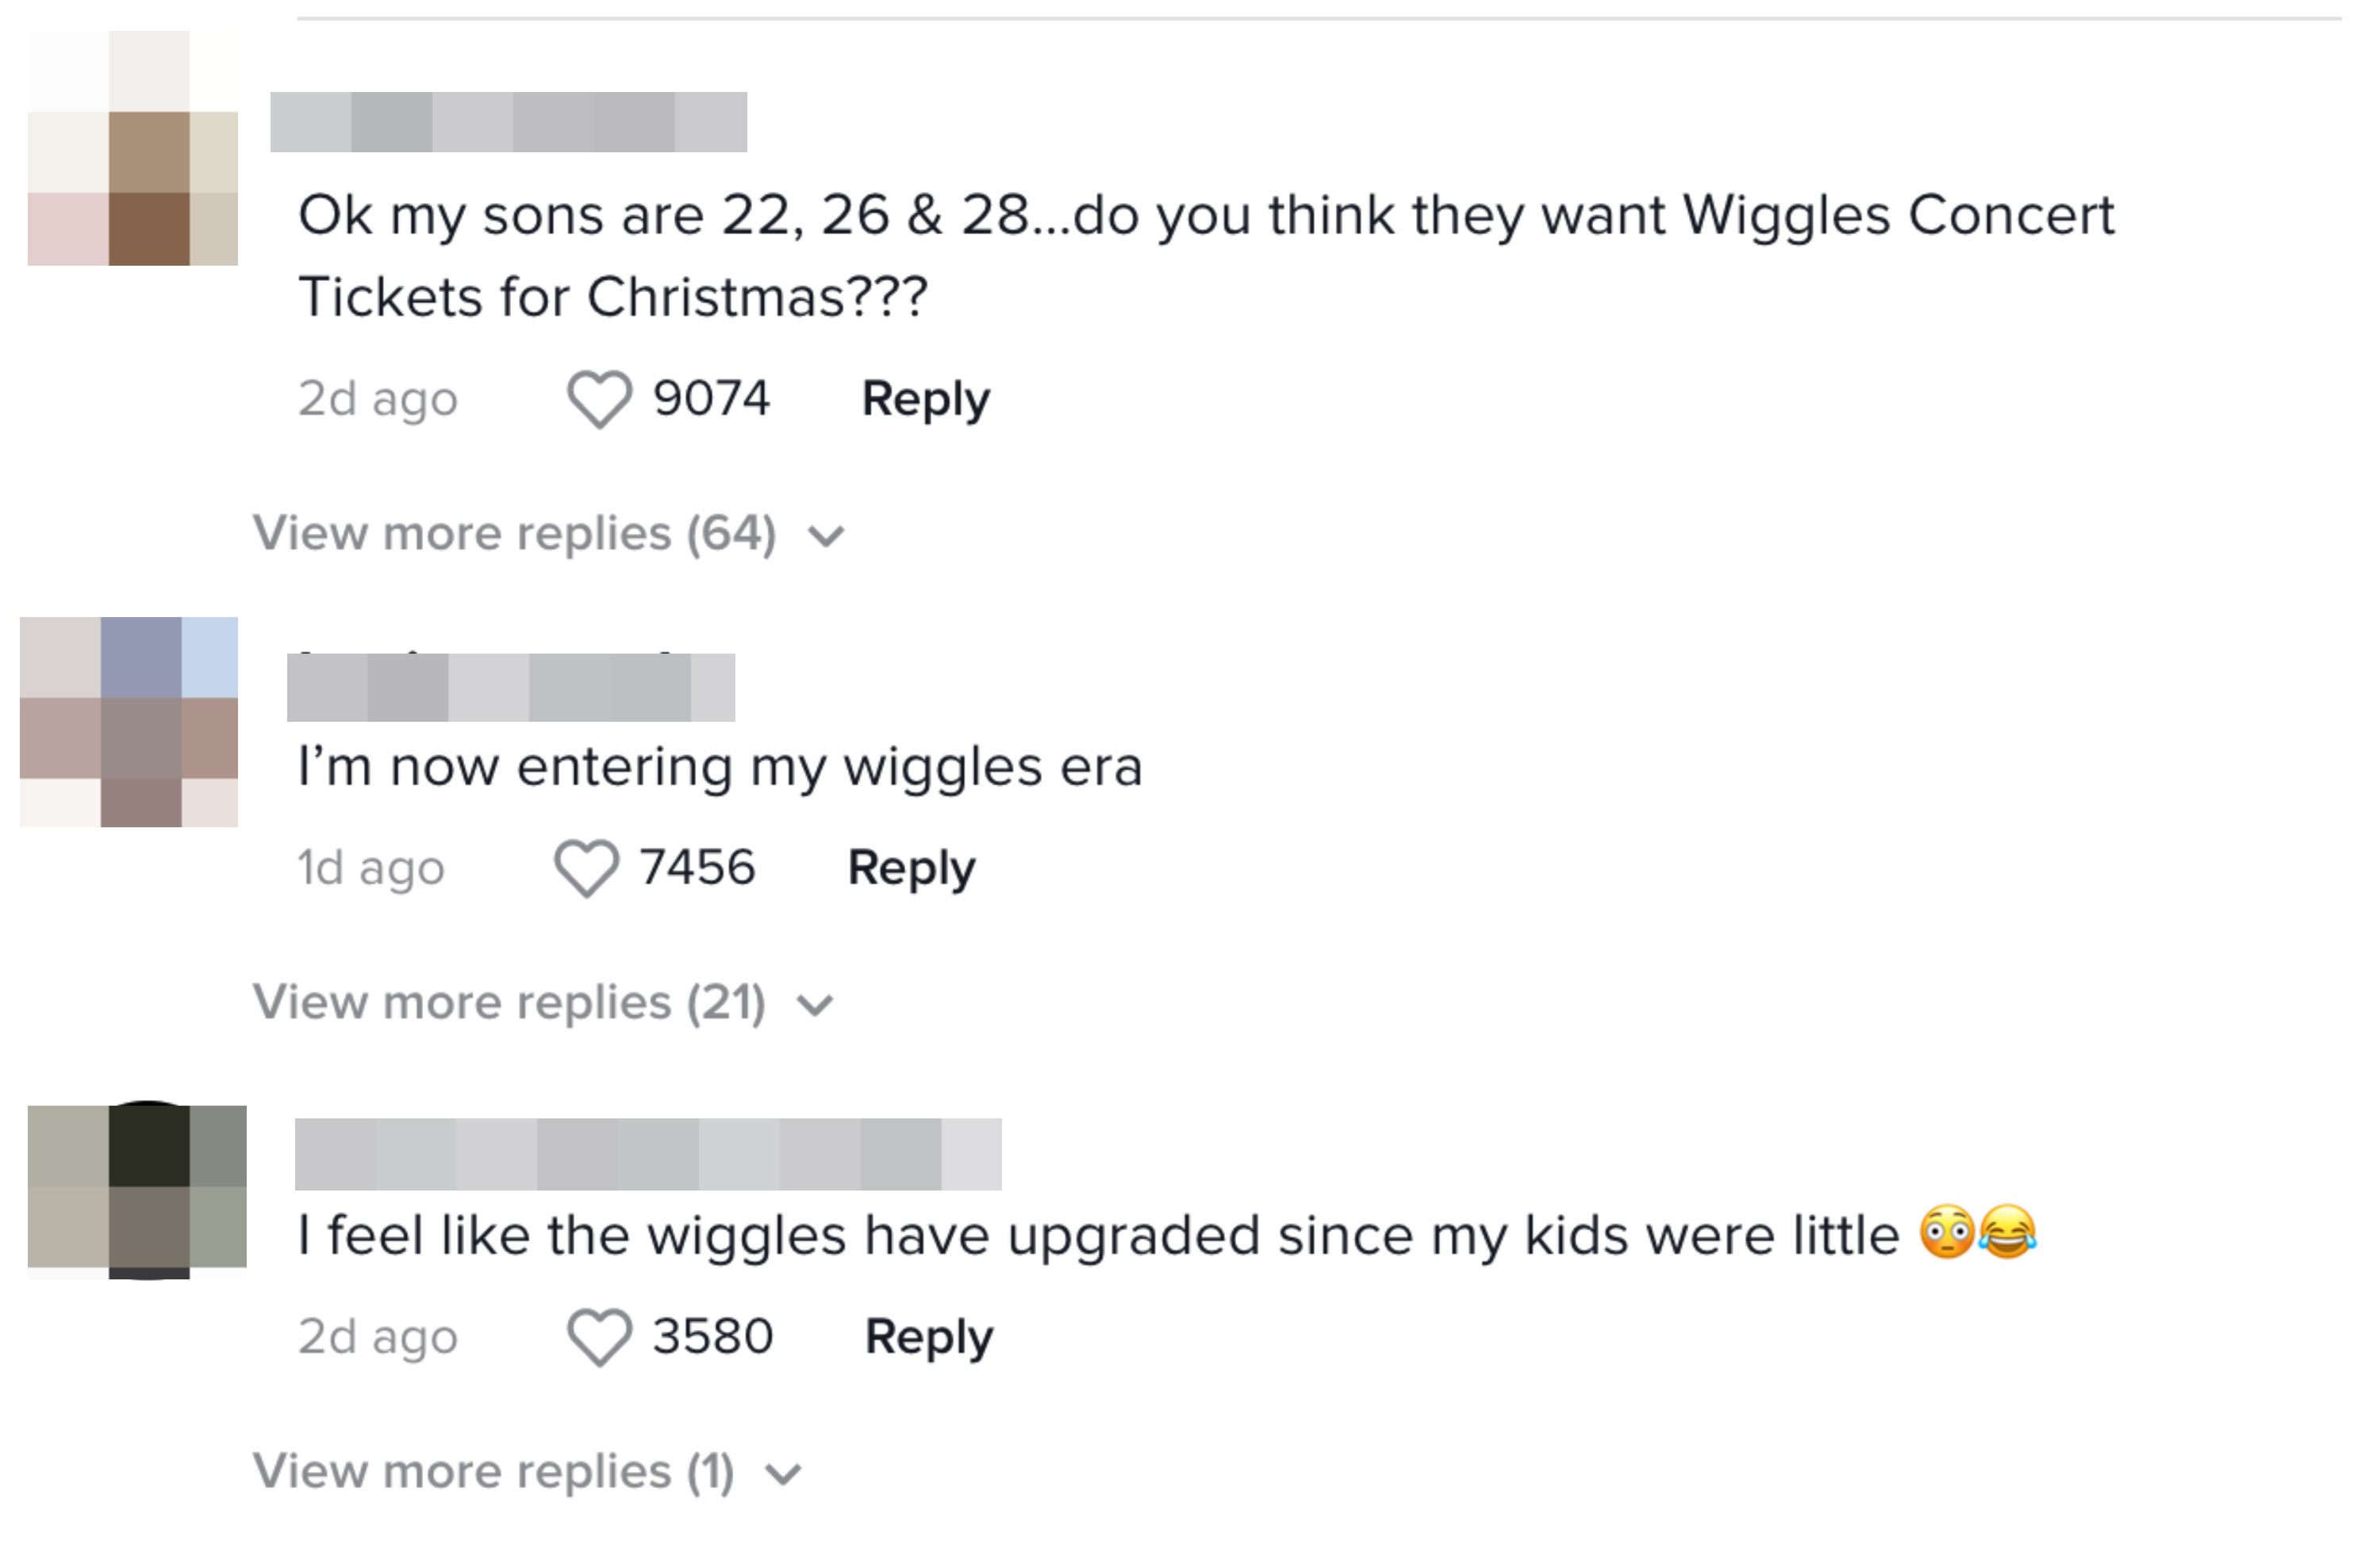 One person said, &quot;Ok my sons are 22, 26 &amp; 28...do you think they want Wiggles Concert Tickets for Christmas???&quot;